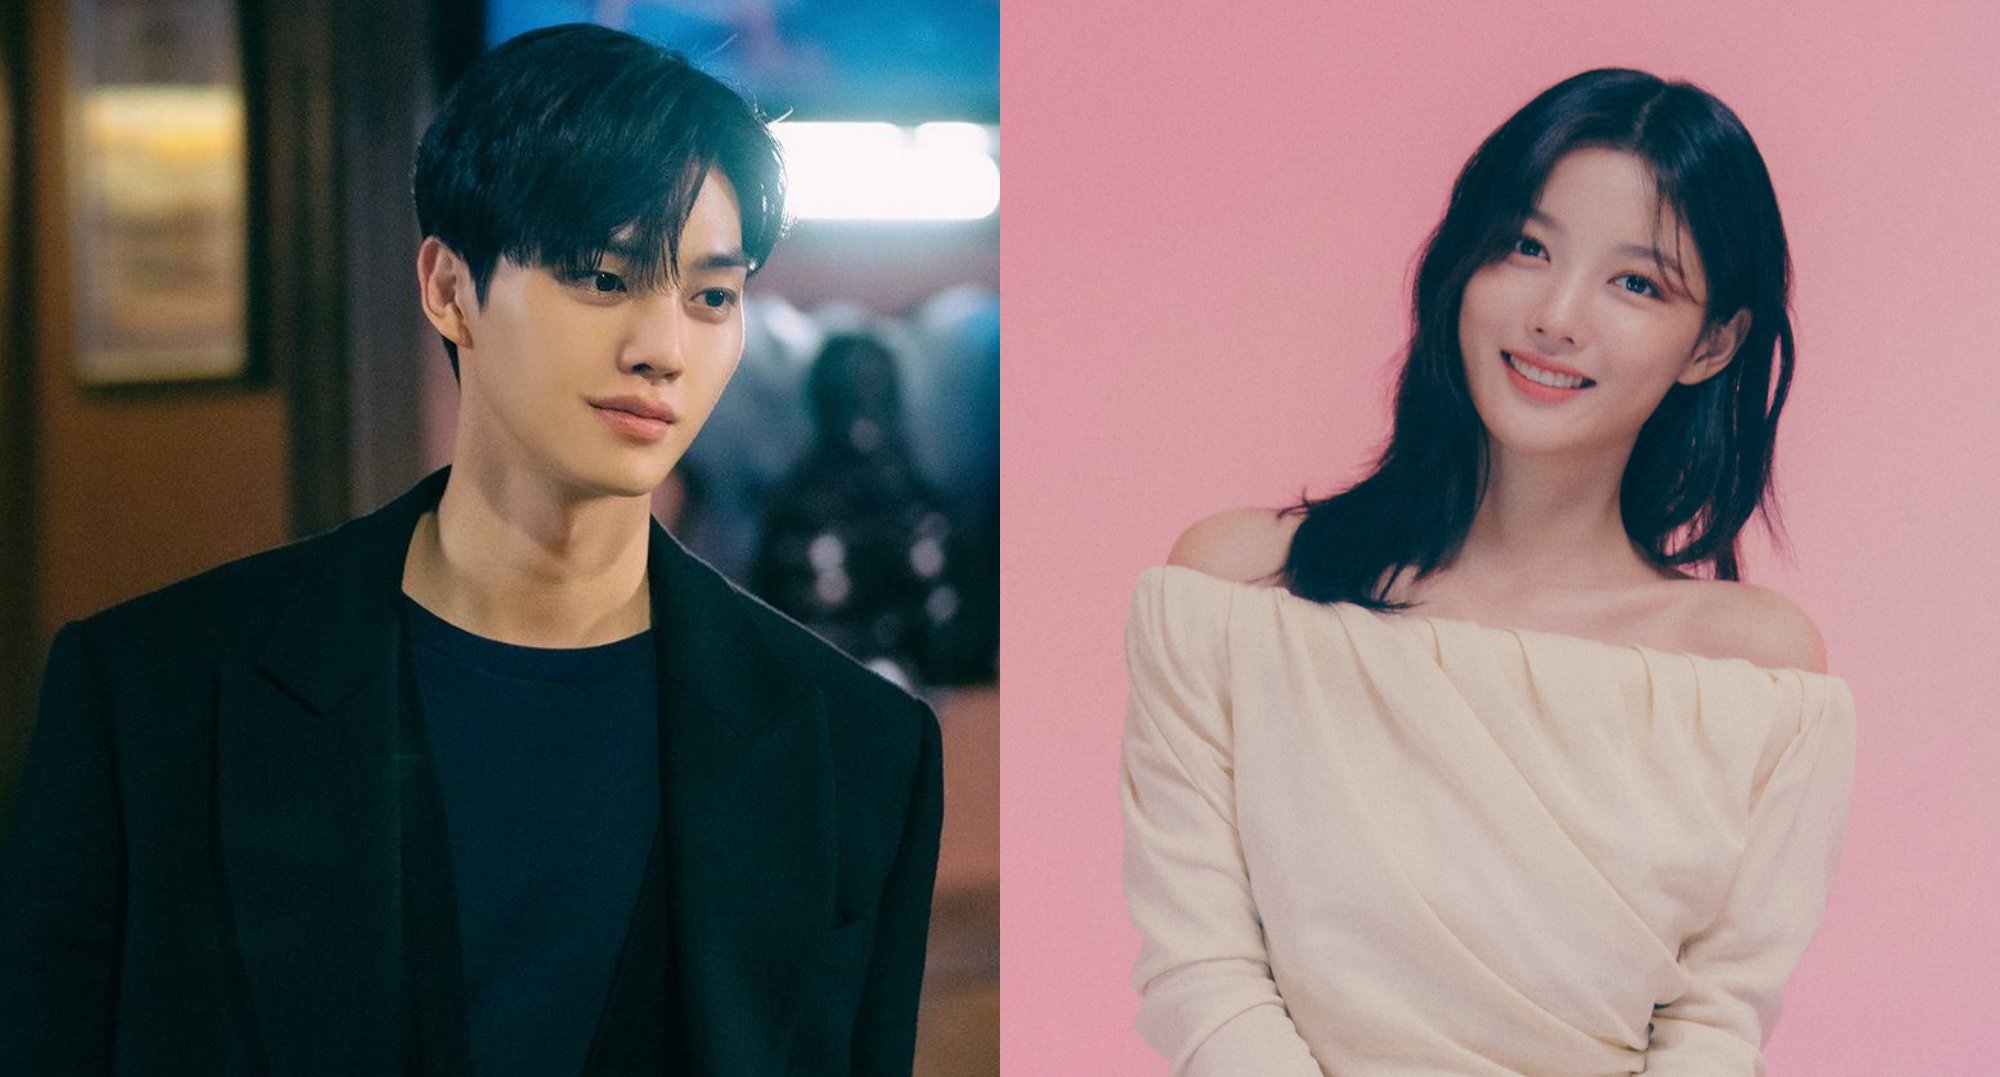 ‘My Demon’: Song Kang and Kim Yoo-jung in Talks to Star Opposite Each Other in Fantasy Romance K-Drama